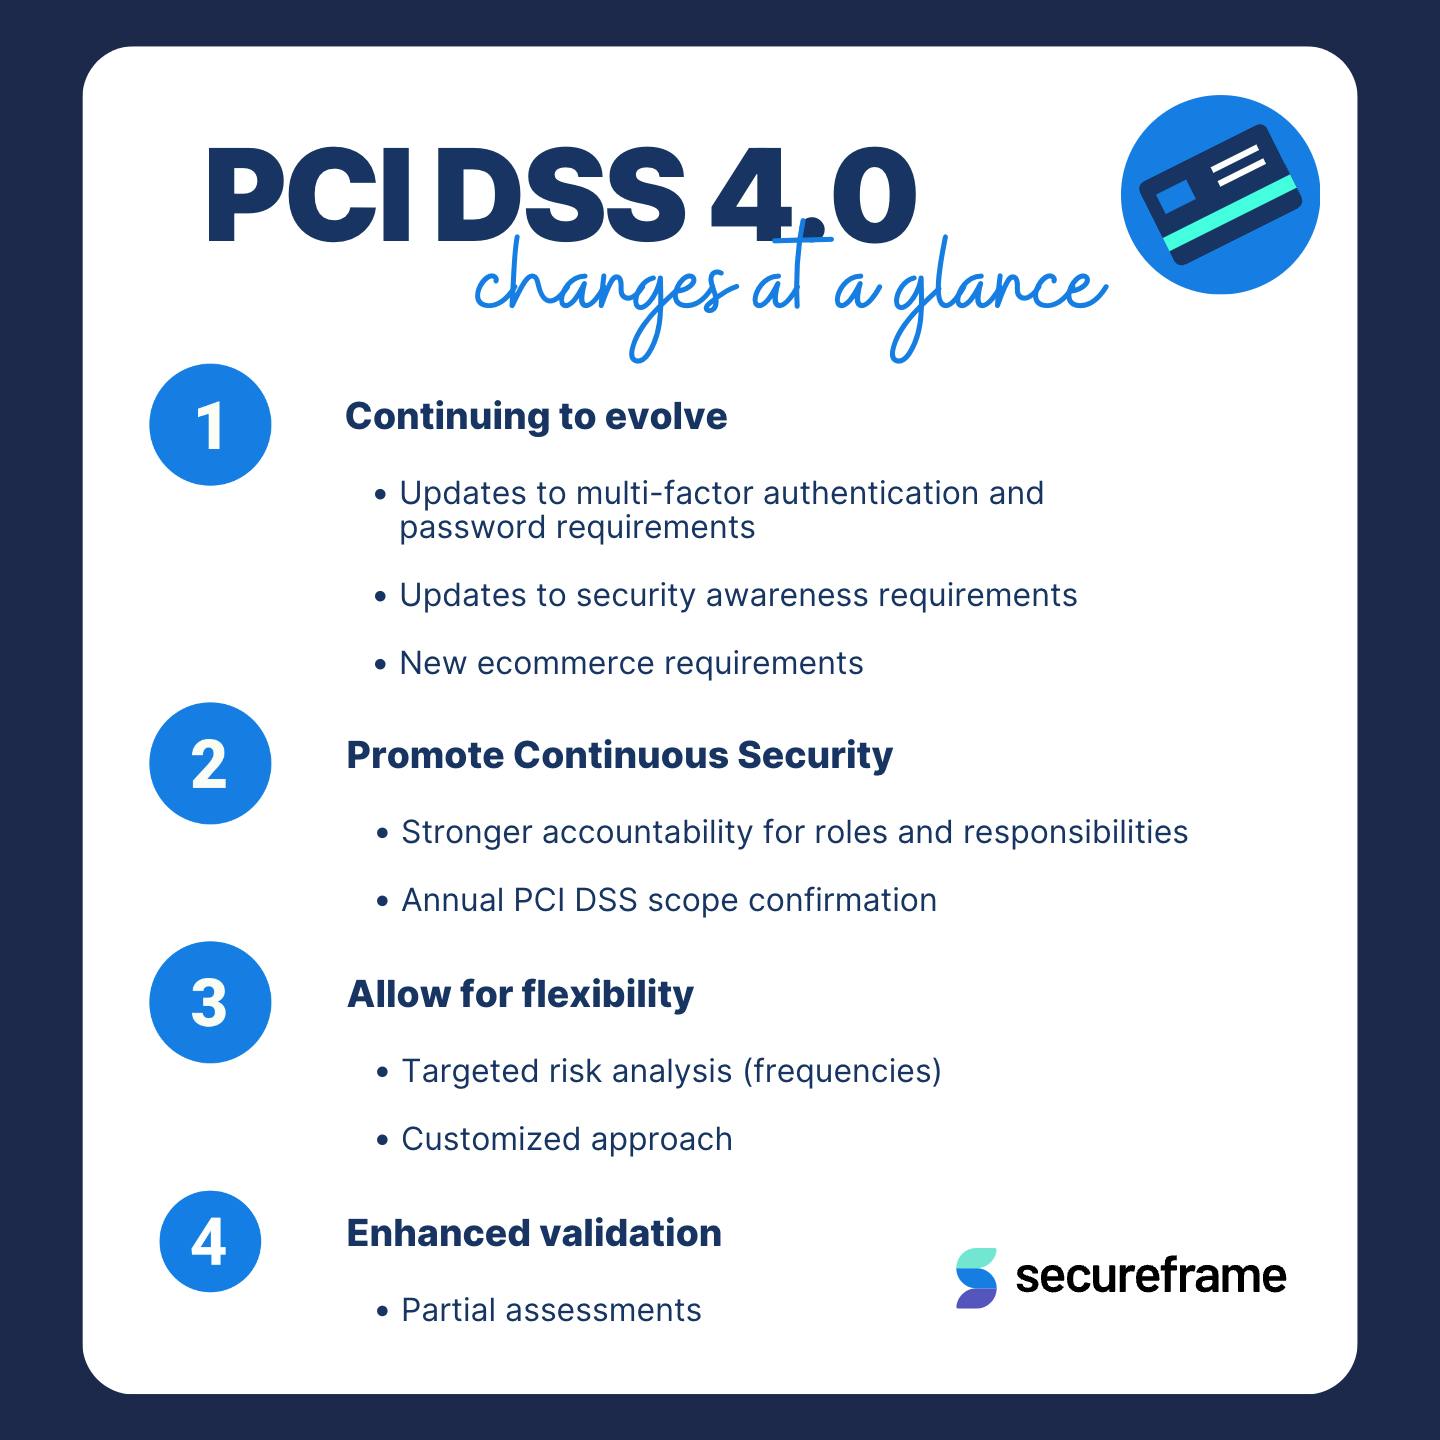 PCI DSS 4.0 changes at a glance listing four major changes